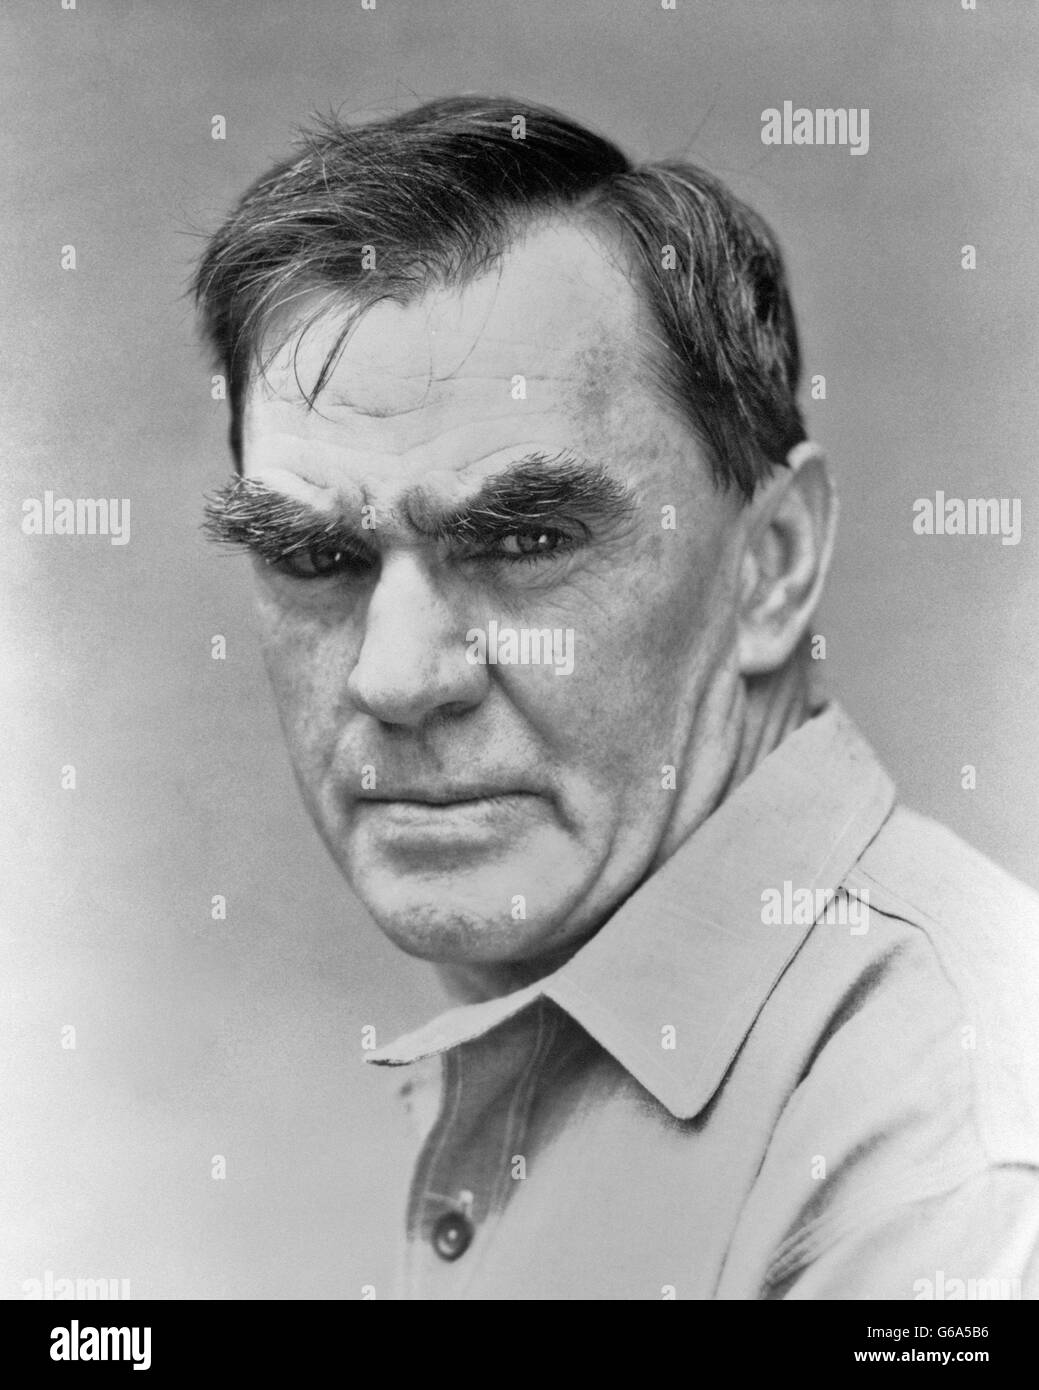 1930s PORTRAIT ANGRY MAN WITH BUSHY EYBEBROWS LOOKING AT CAMERA Stock Photo